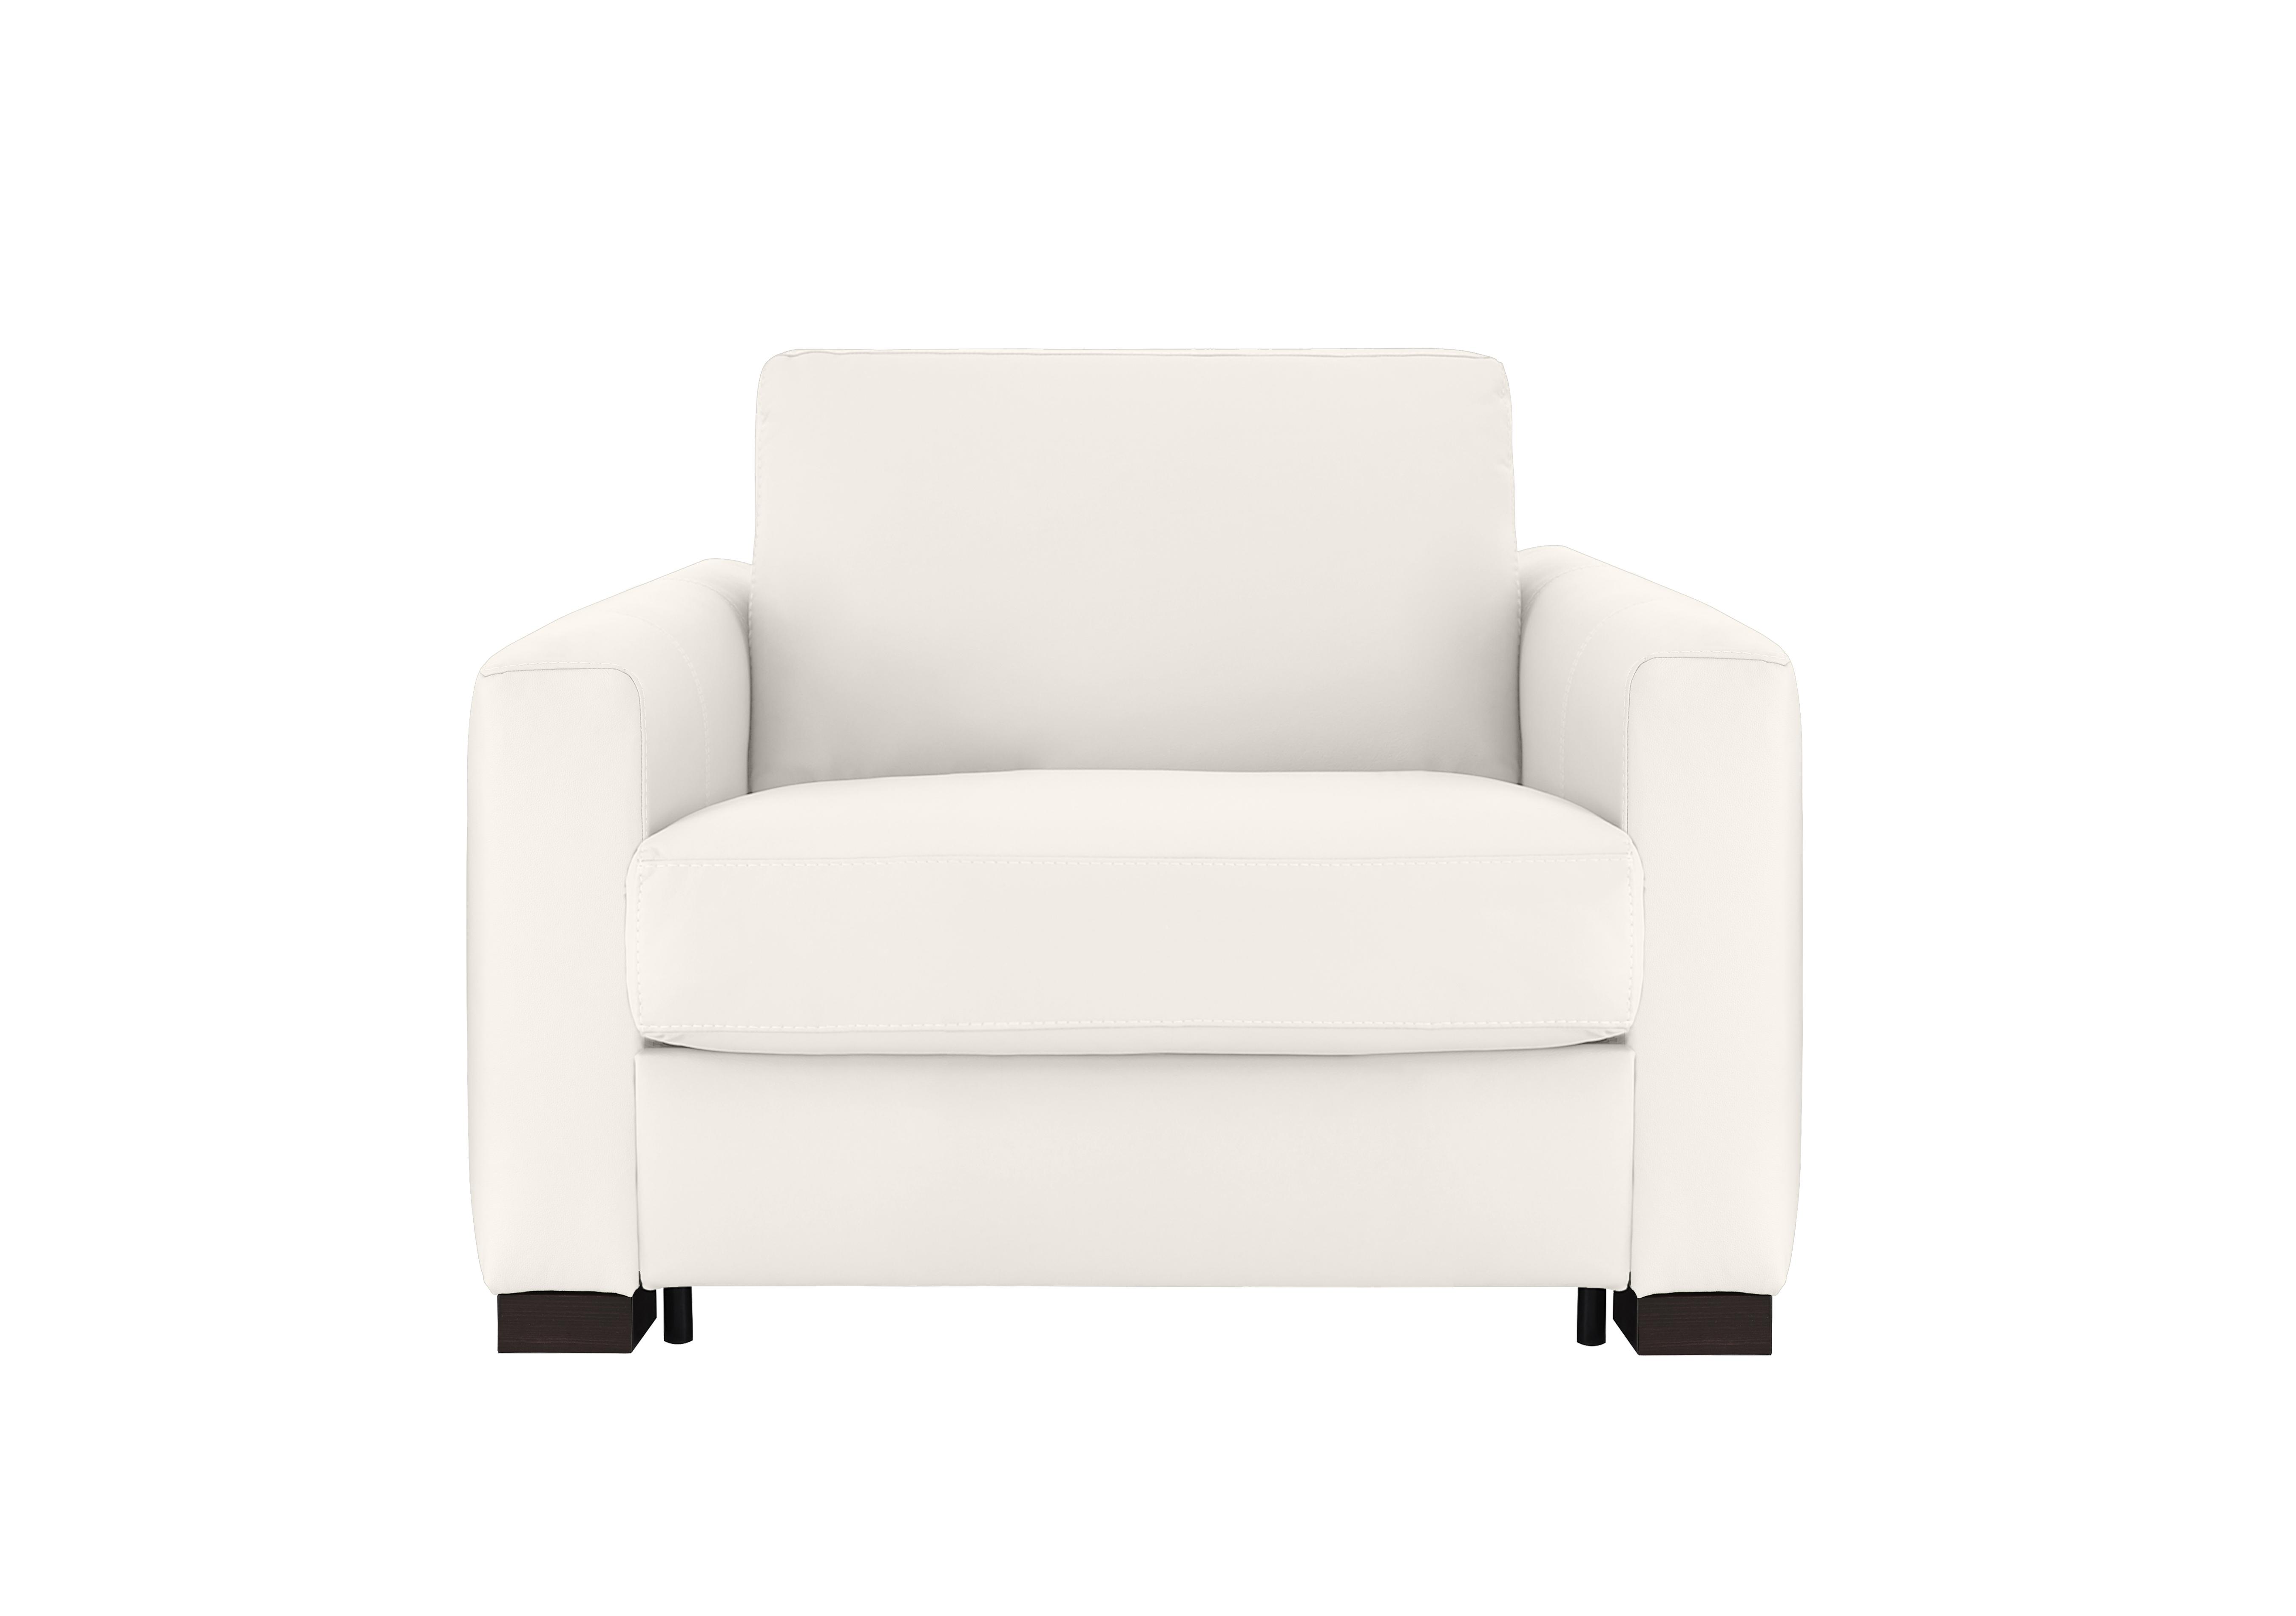 Alcova Leather Chair Sofa Bed with Box Arms in Torello Bianco 93 on Furniture Village